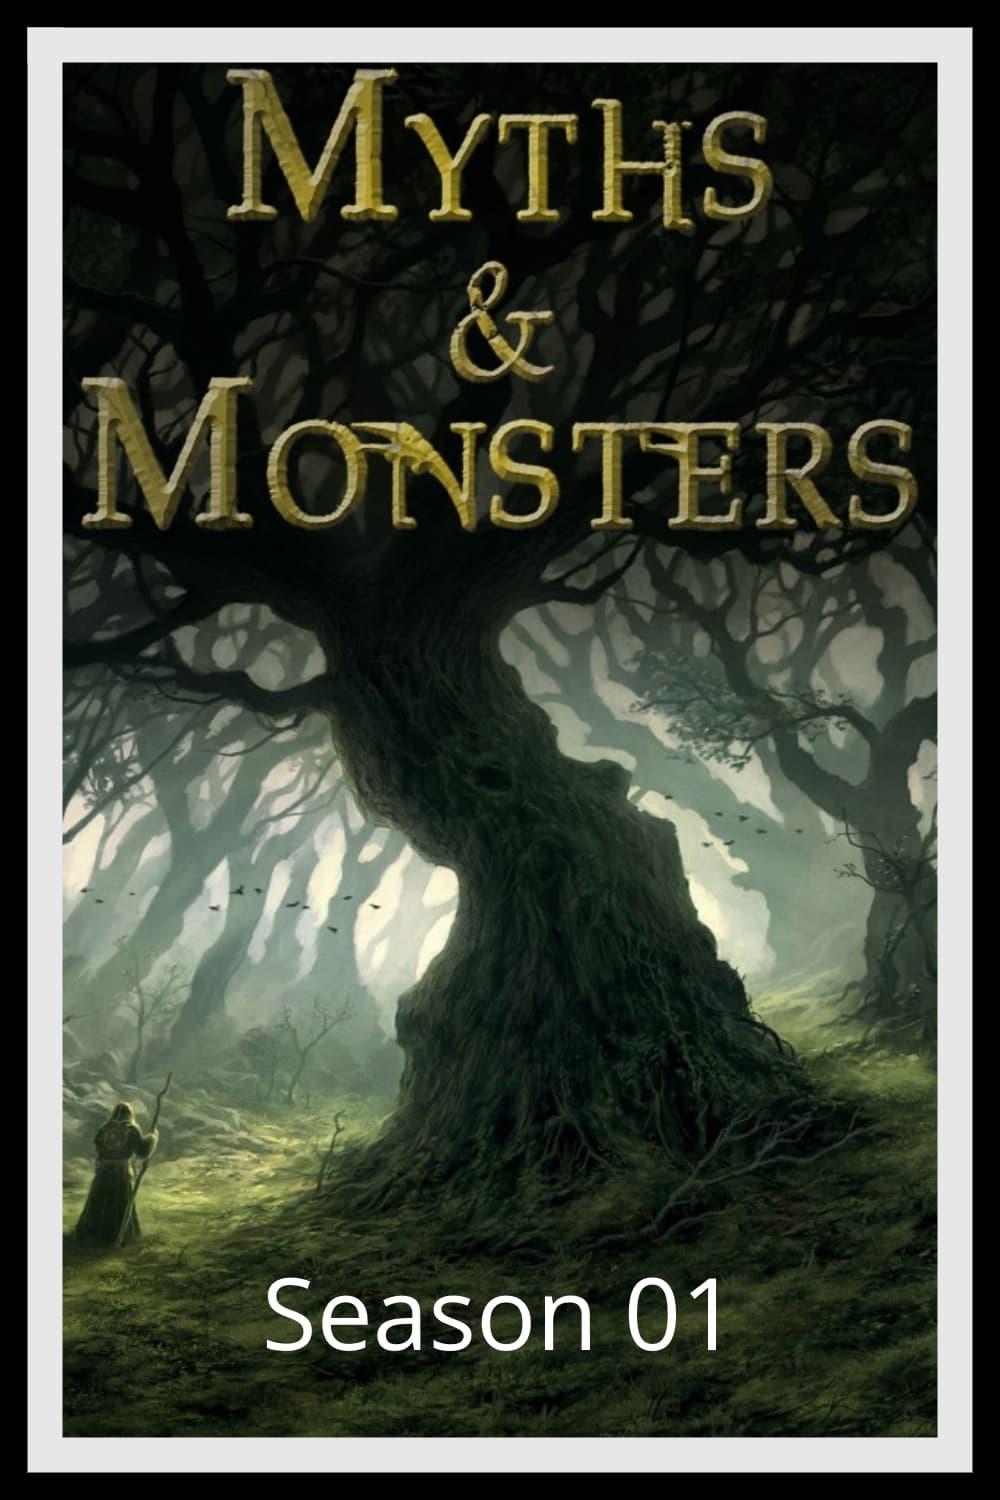 Myths & Monsters poster